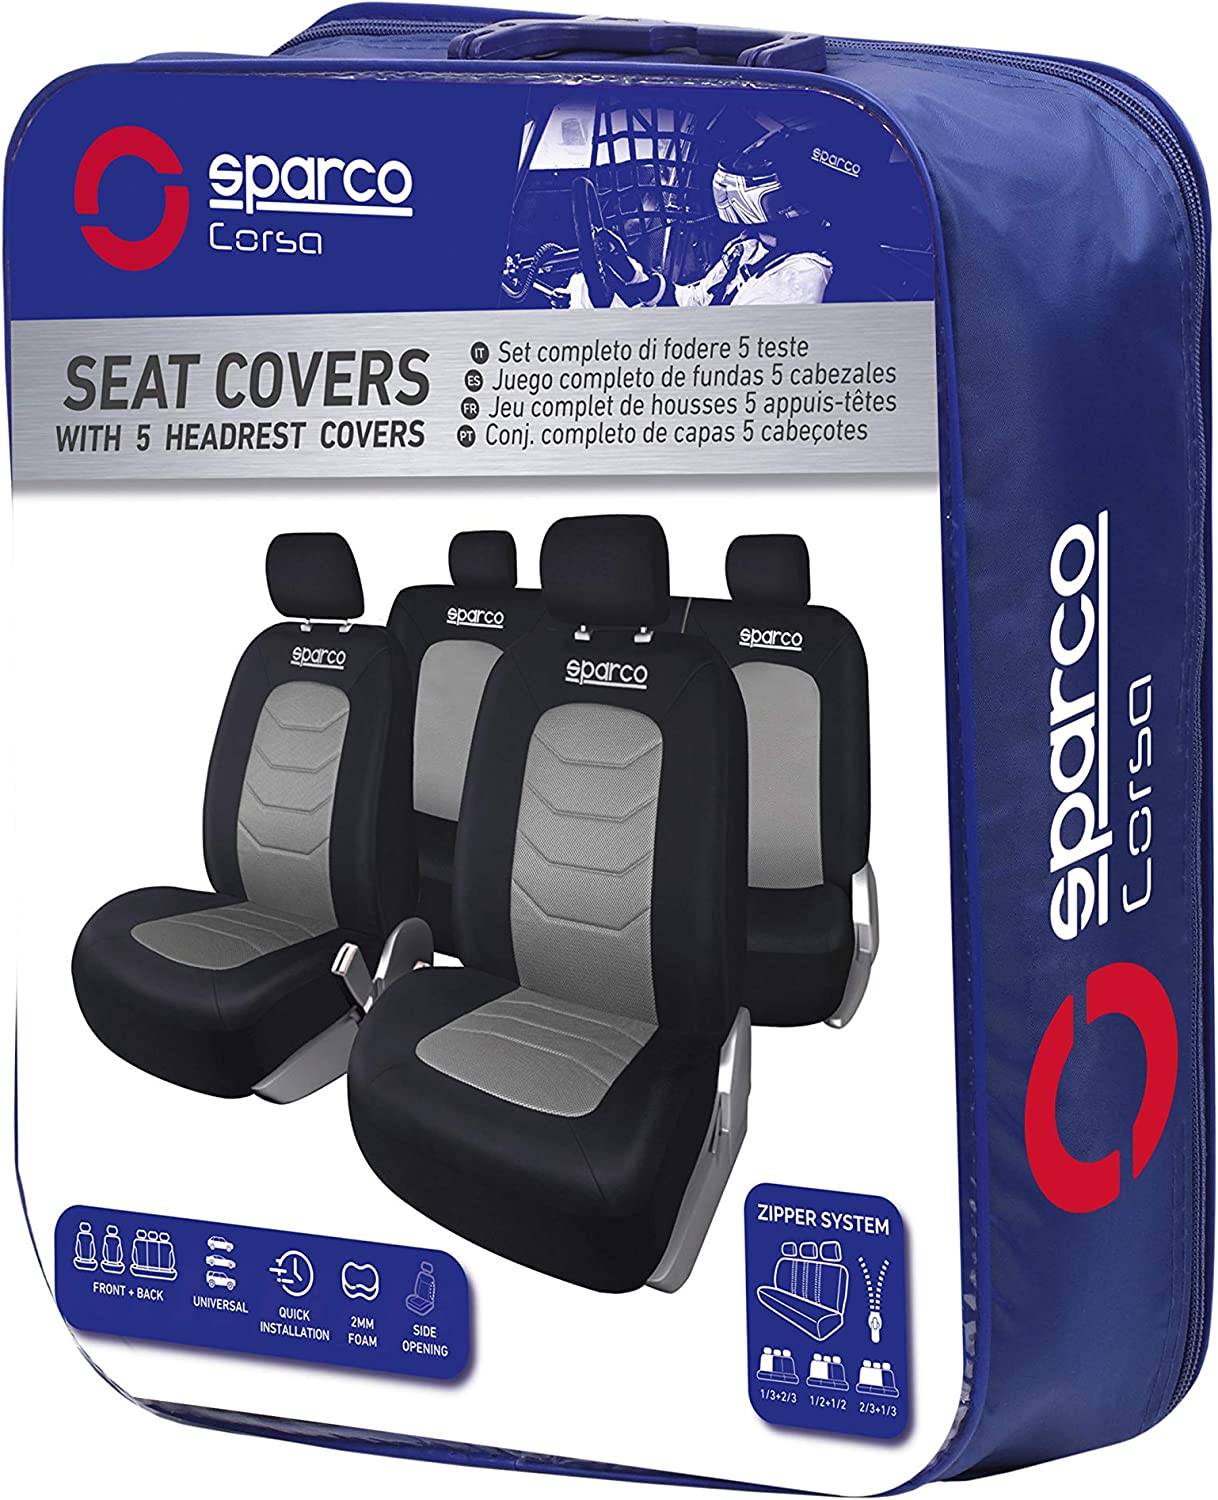 Sparco Top-Loading Vinyl Sheet Protectors - For Letter 8 1/2 X 11